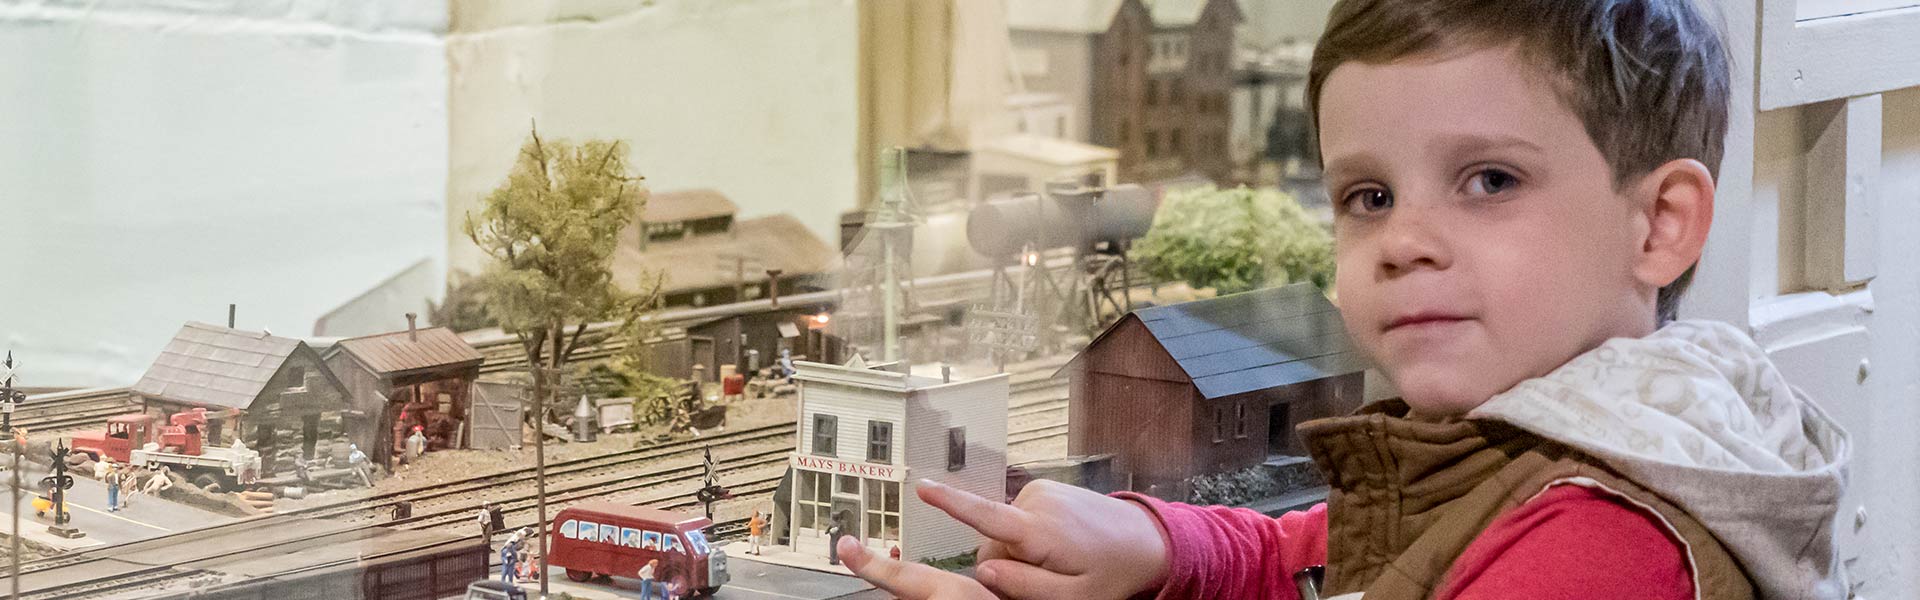 Little boy pointing on toy trains